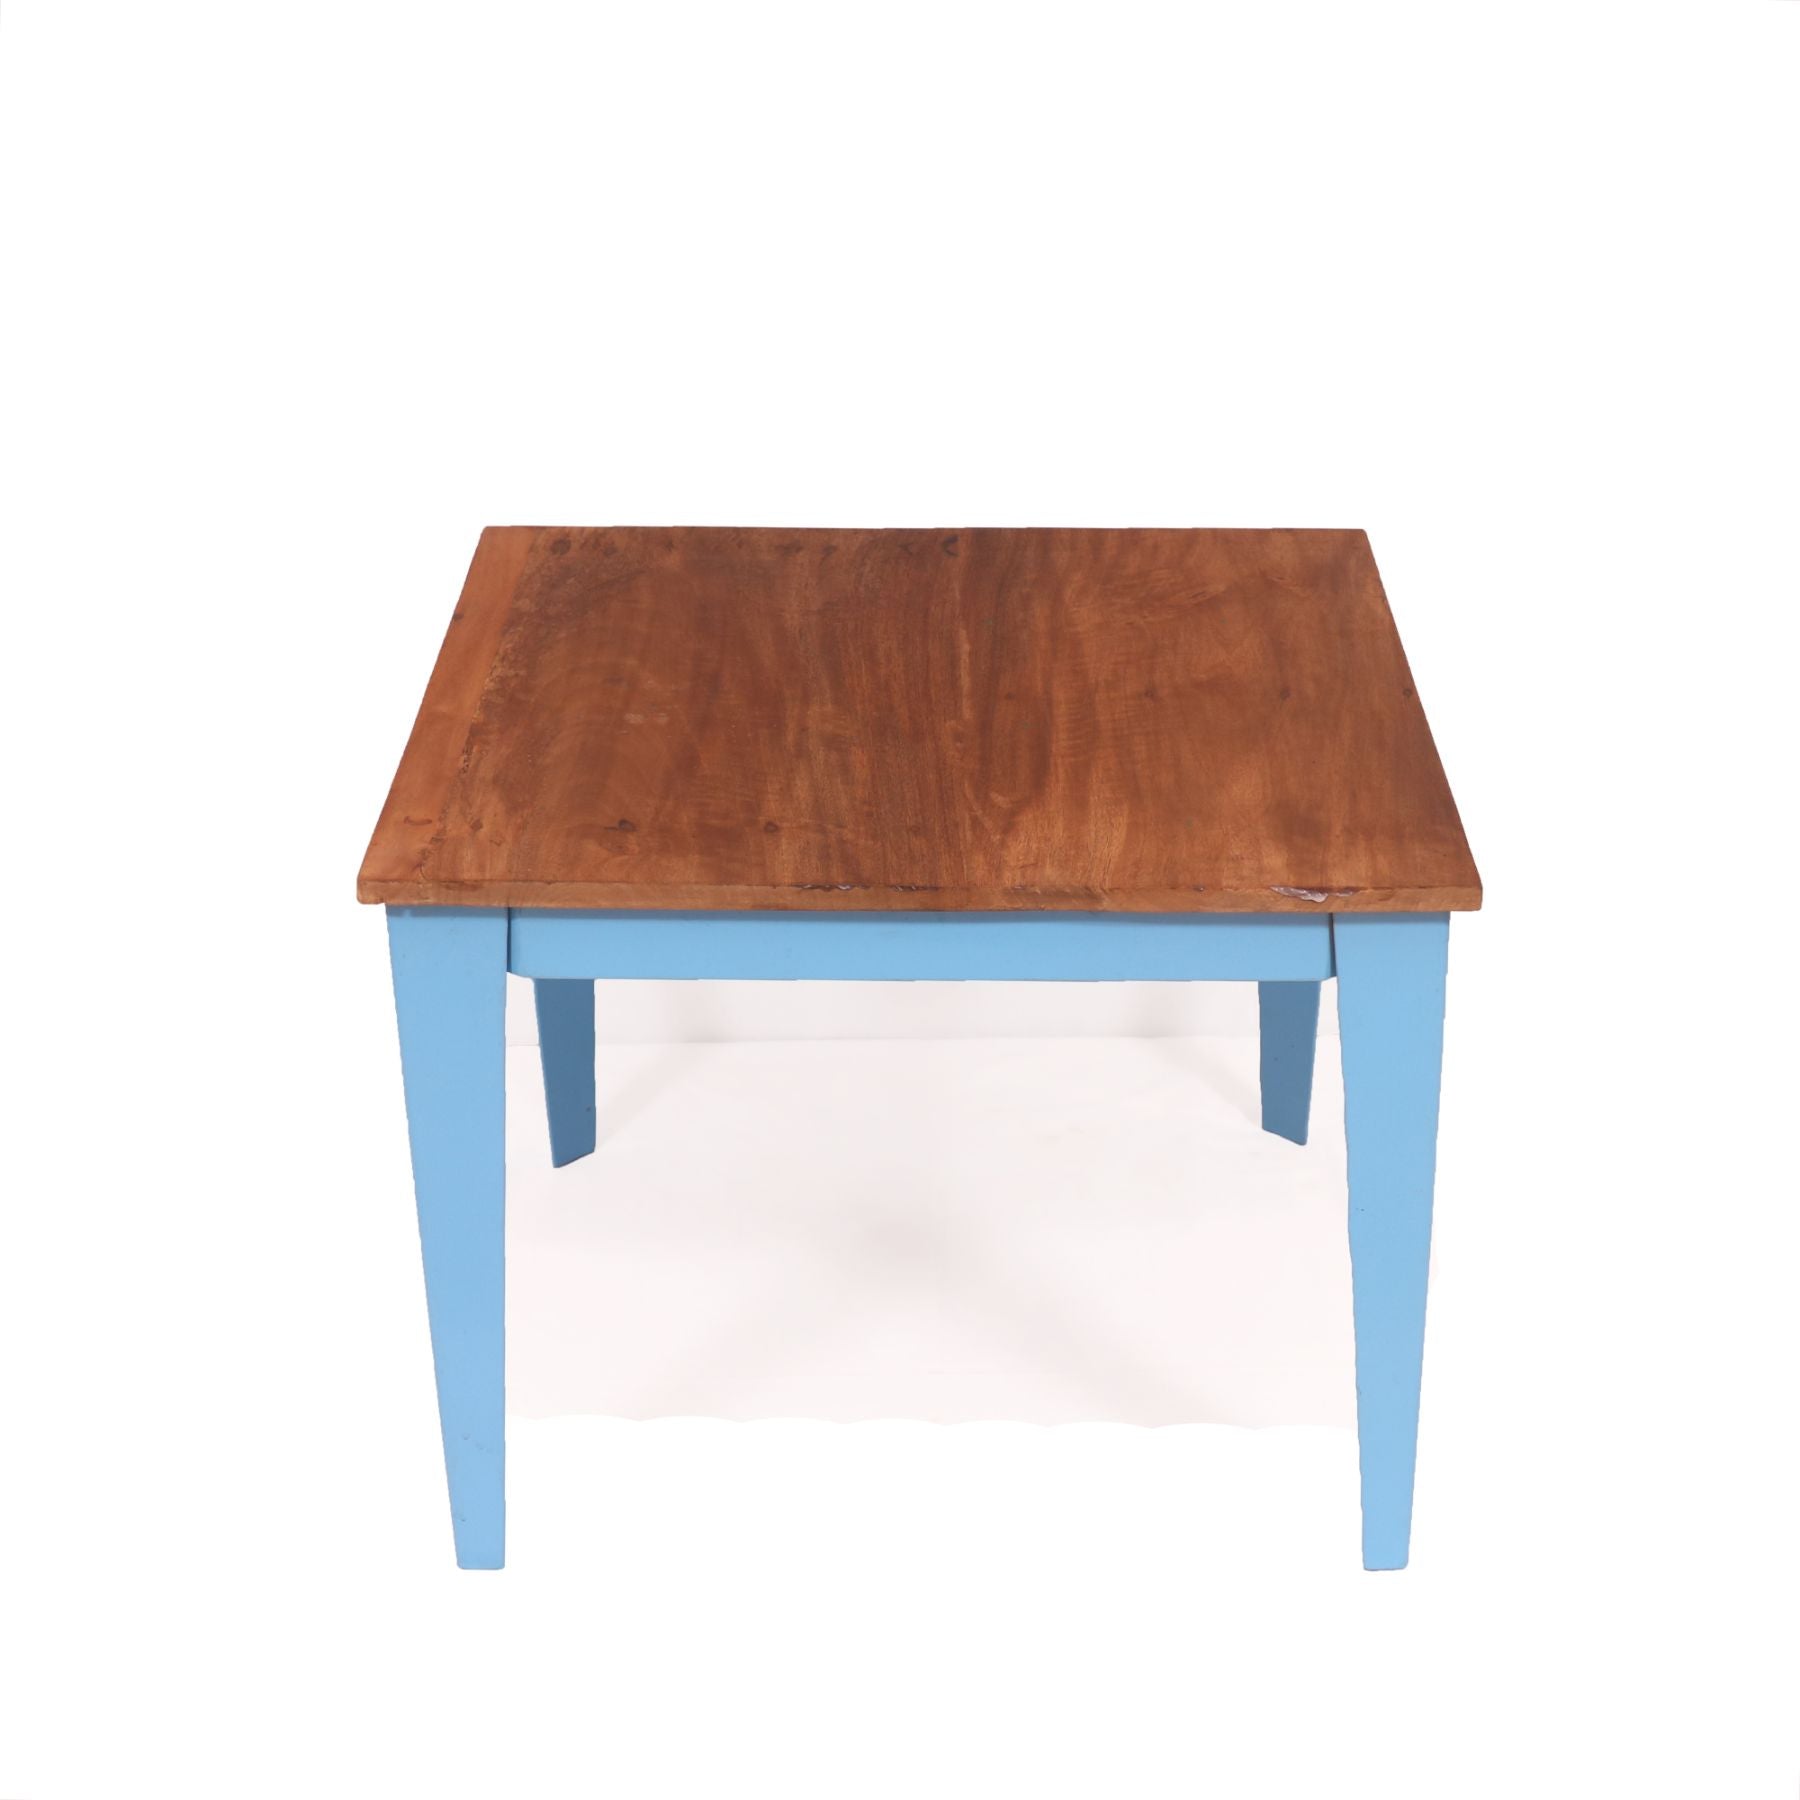 Whimsical Square Table Coffee Table